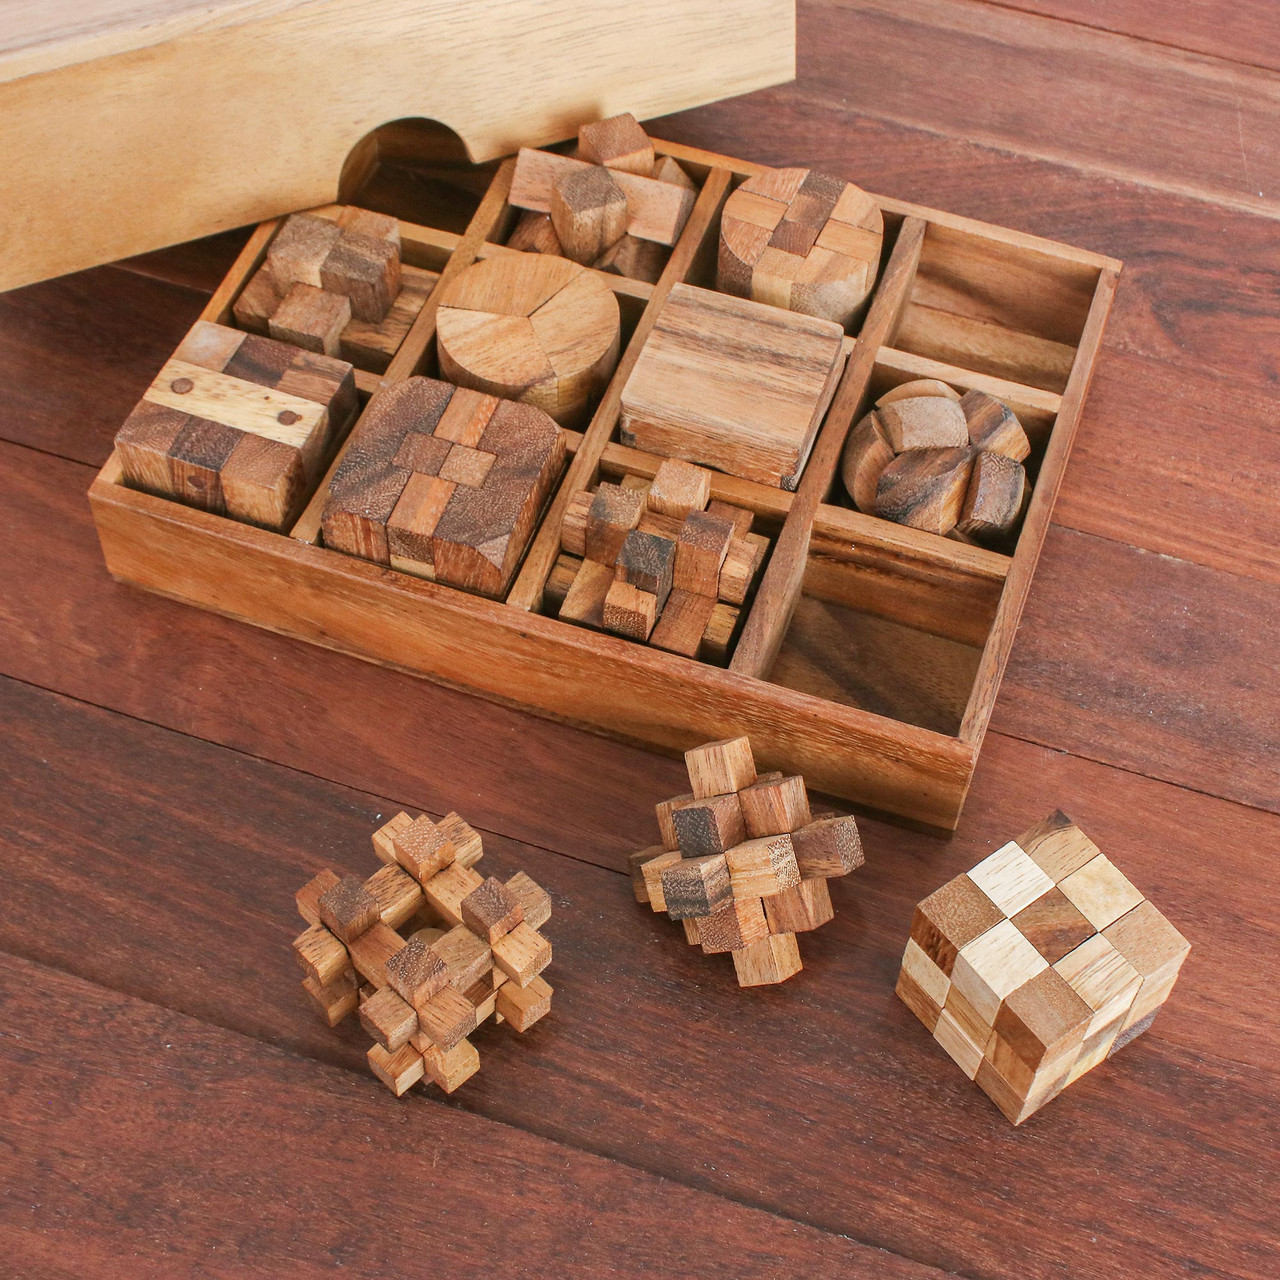 12 Handcrafted Wood Puzzles with Box from Thailand, 'Array of Challenges